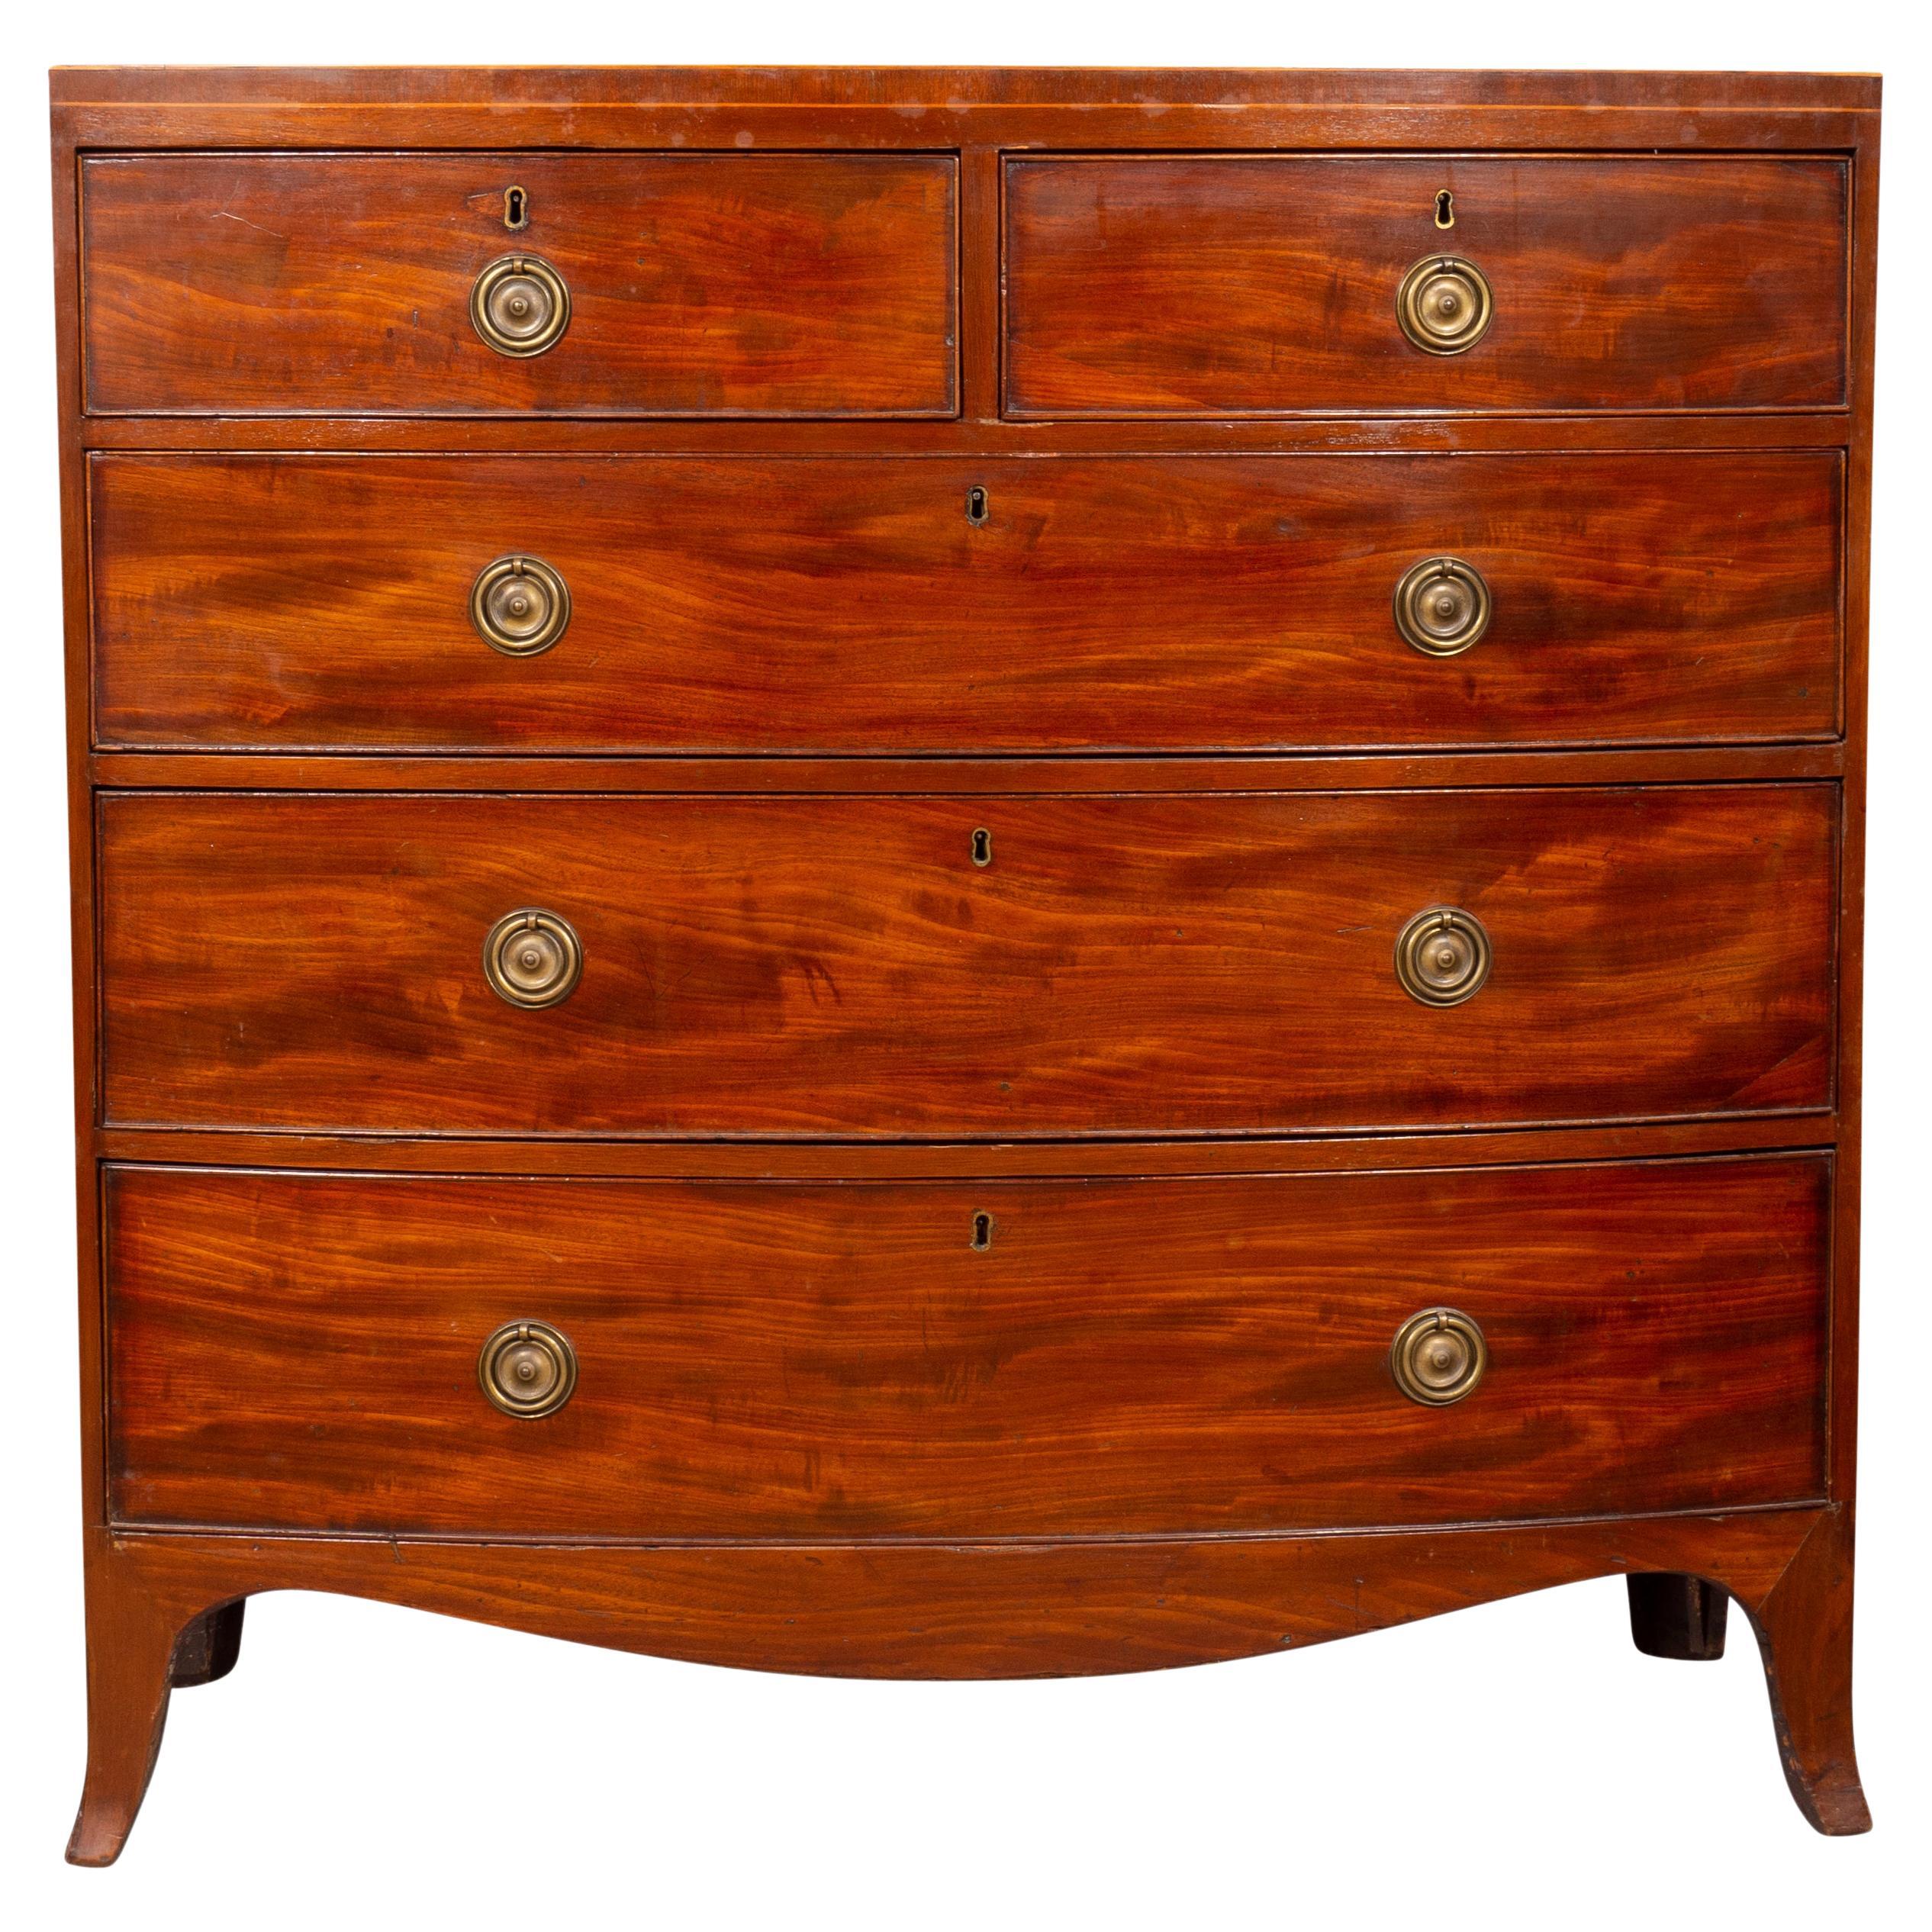 George III Mahogany Bow front Chest Of Drawers